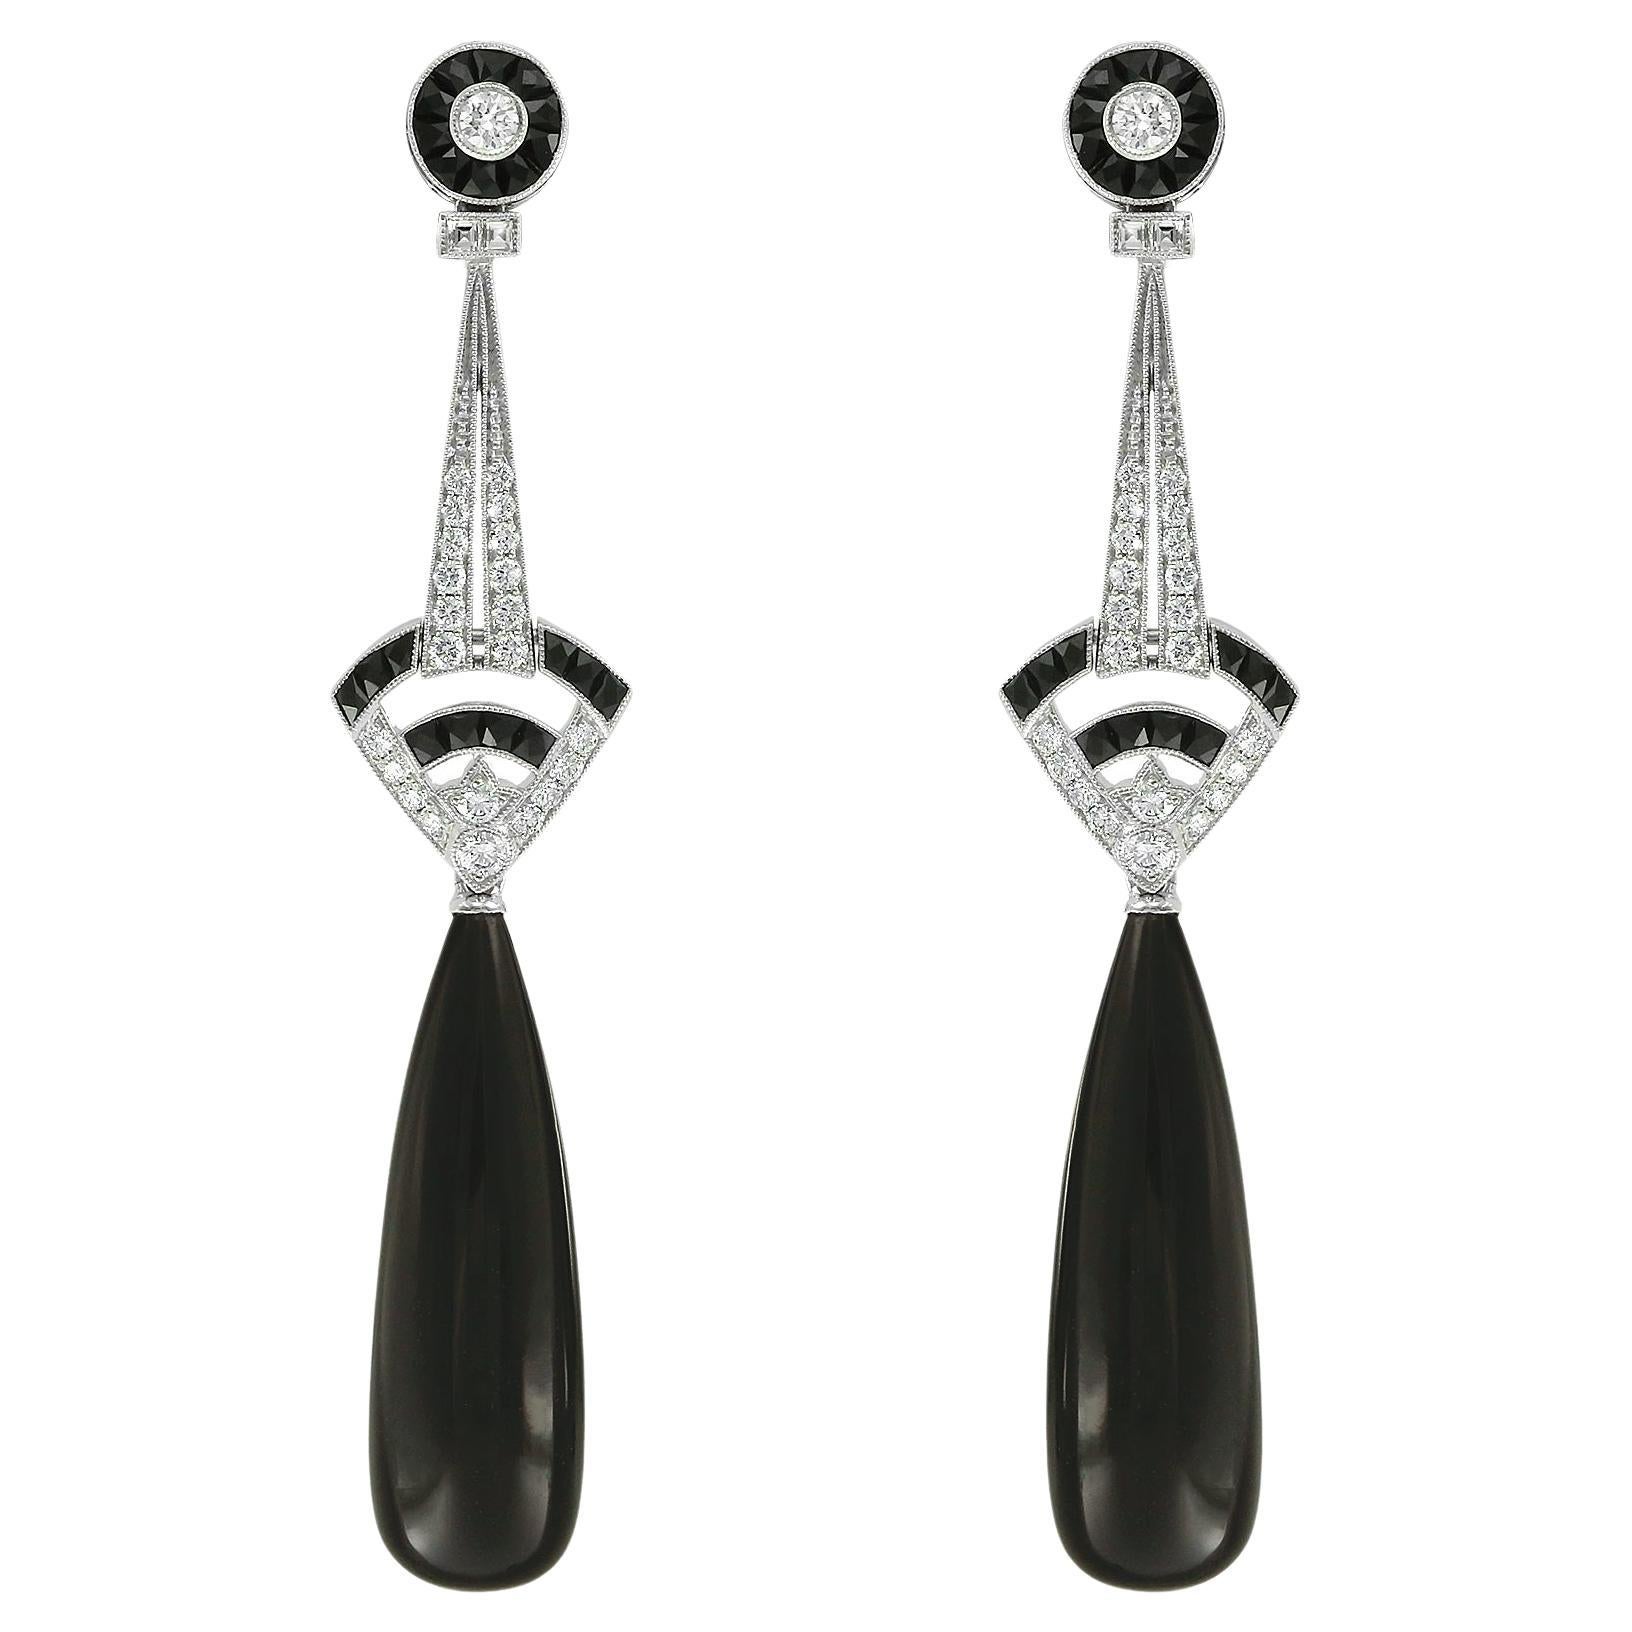 Savoir-faire Onyx '28.35ct' and Diamond '0.55ct' Earrings in 18ct White Gold